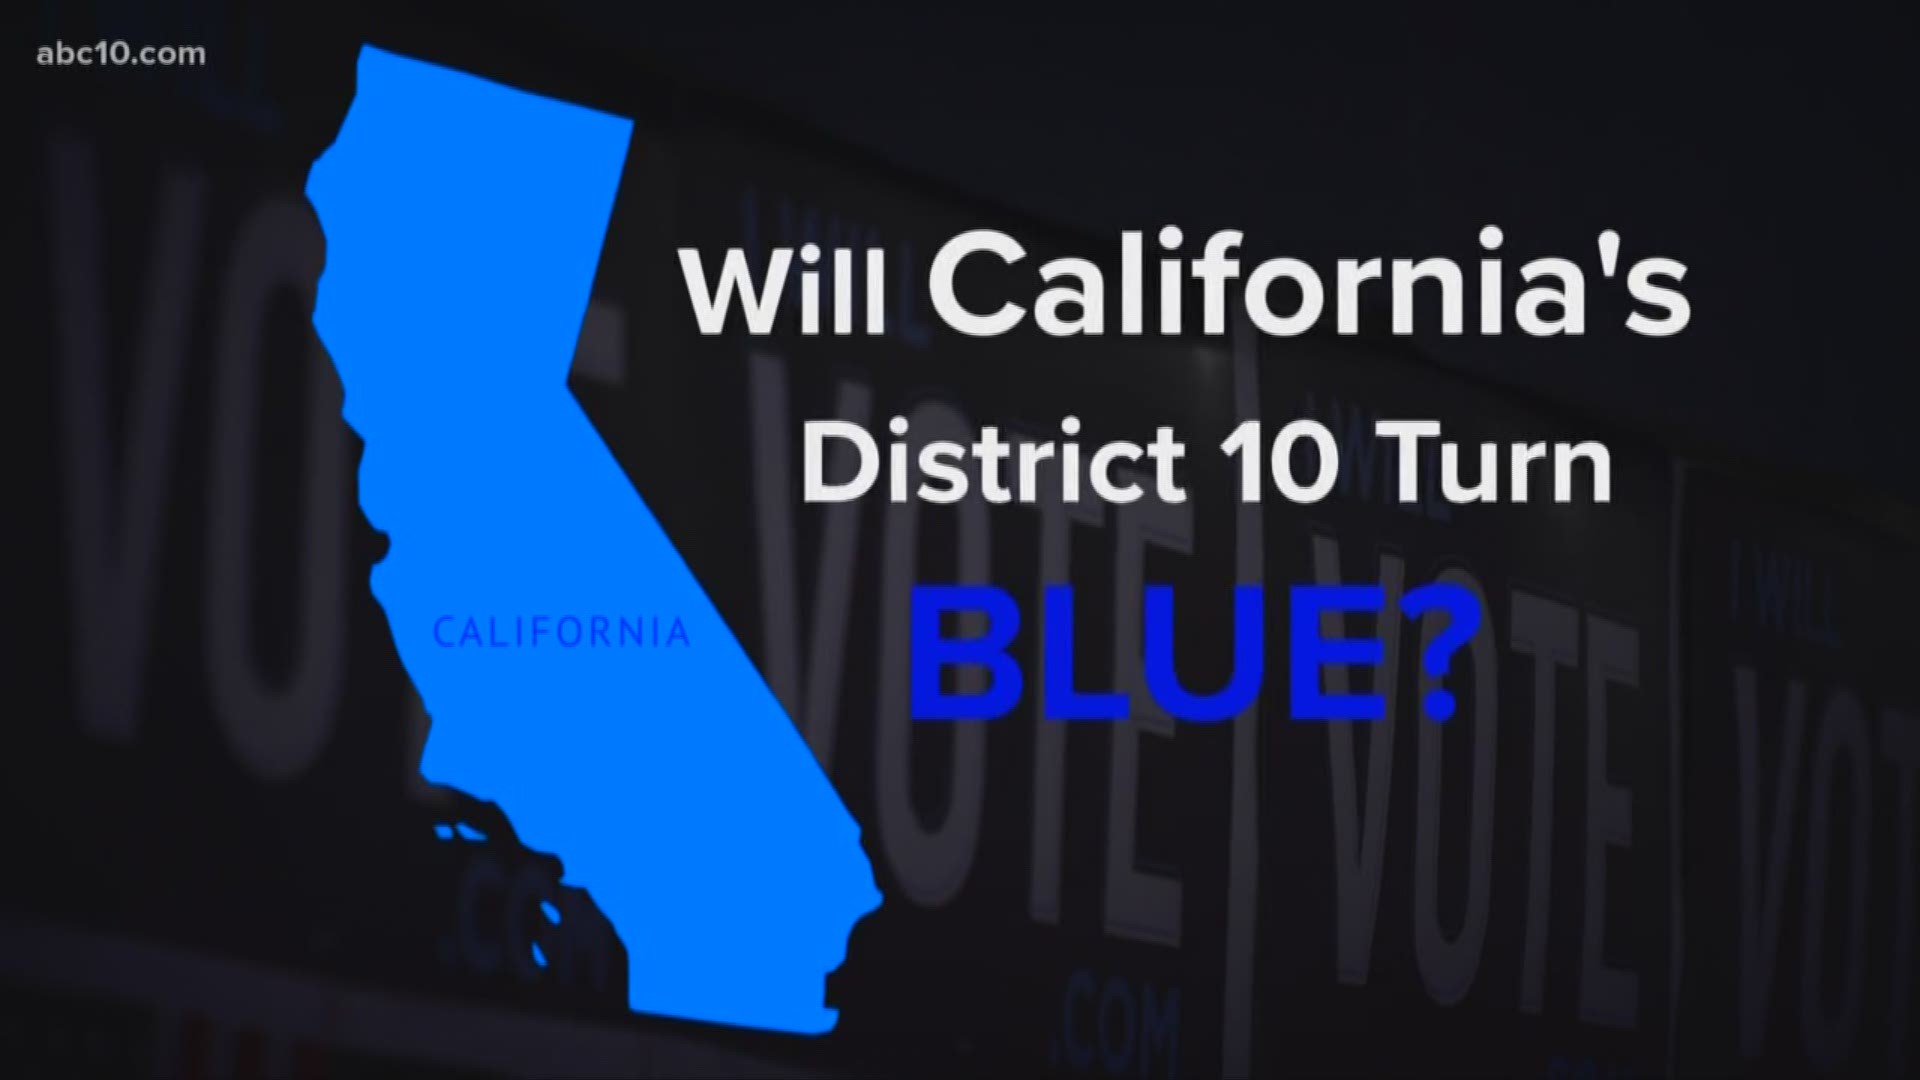 The race for California's District 10 is tight. A recent UC Berkeley poll has Democrat Josh Harder leading incumbent Republican Jeff Denham by five points among likely voters, with 5 percent still undecided.